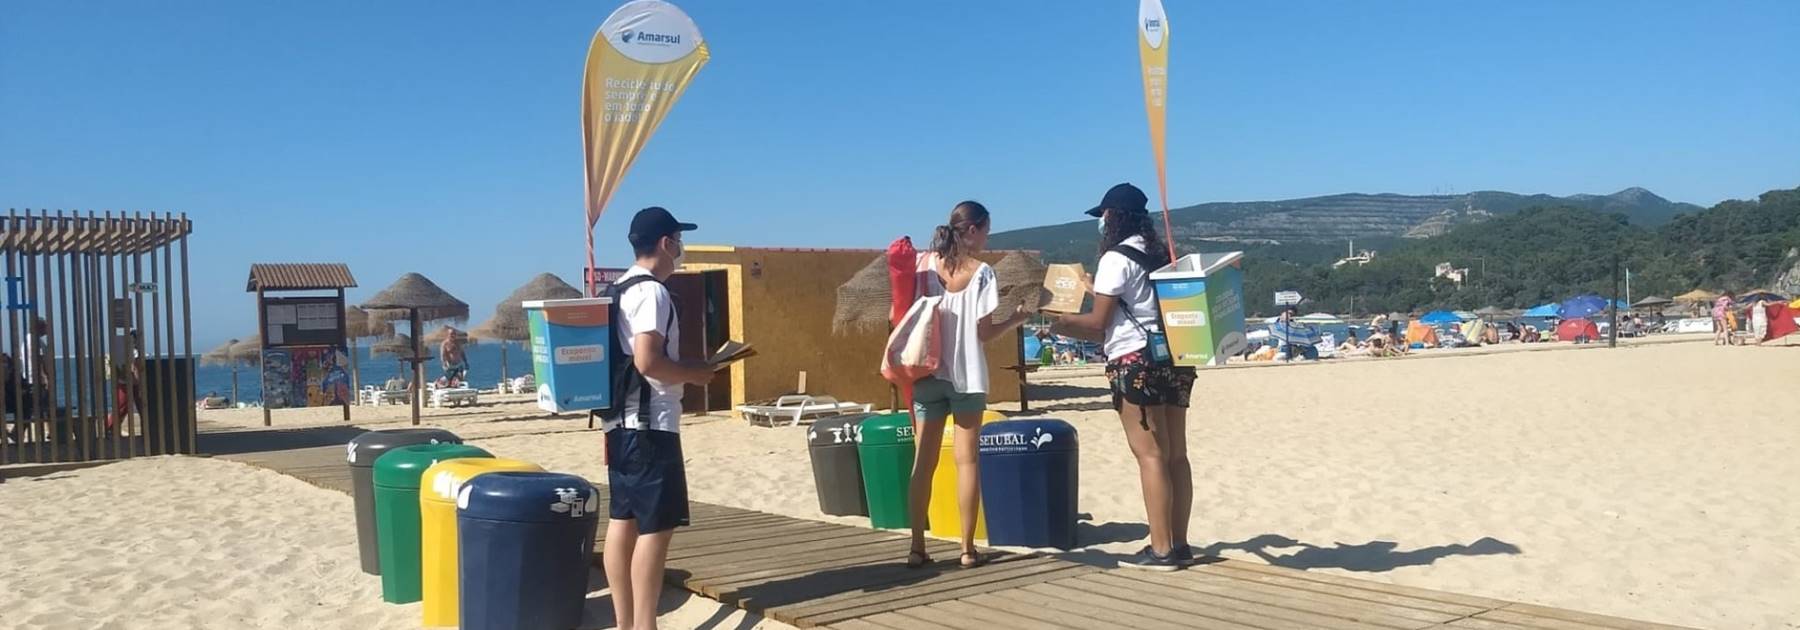 Sunbathing and Recycling: a Portuguese experience